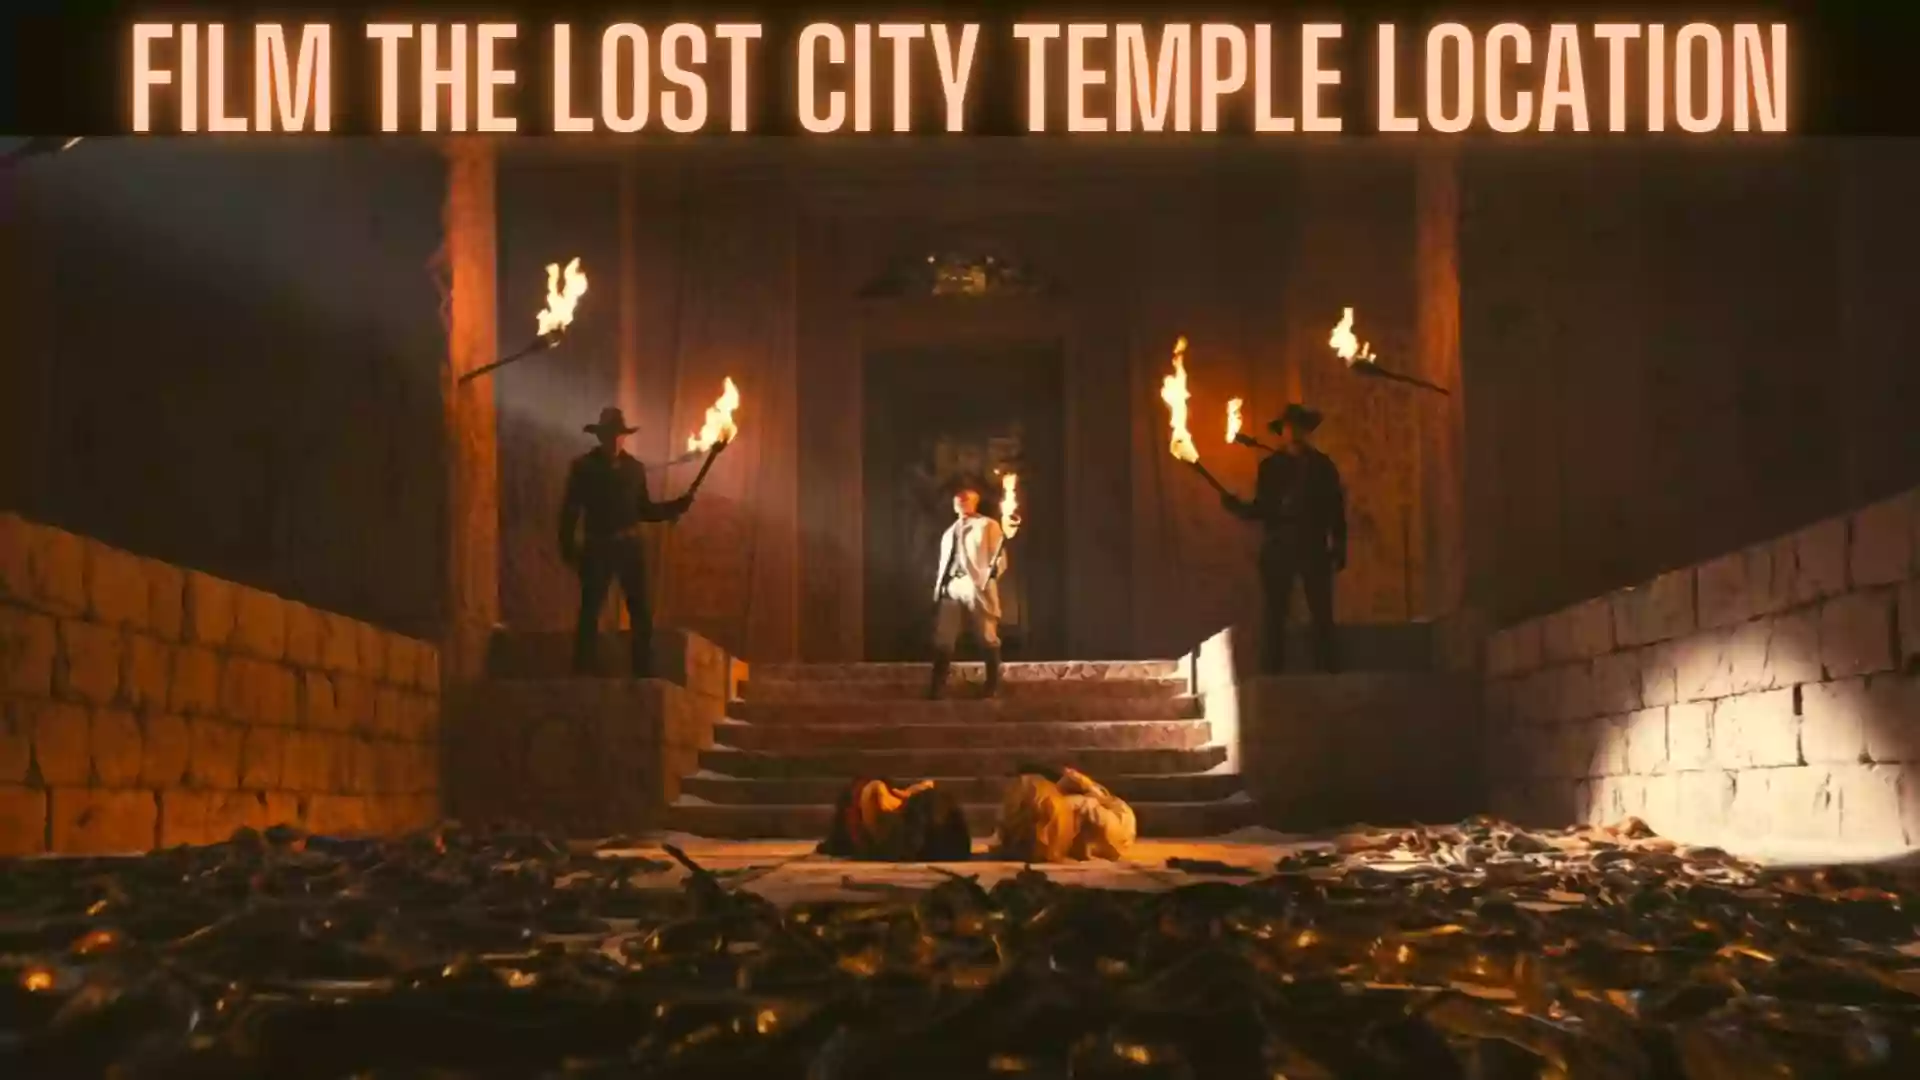 Film The Lost City Temple Location | The Lost City Temple